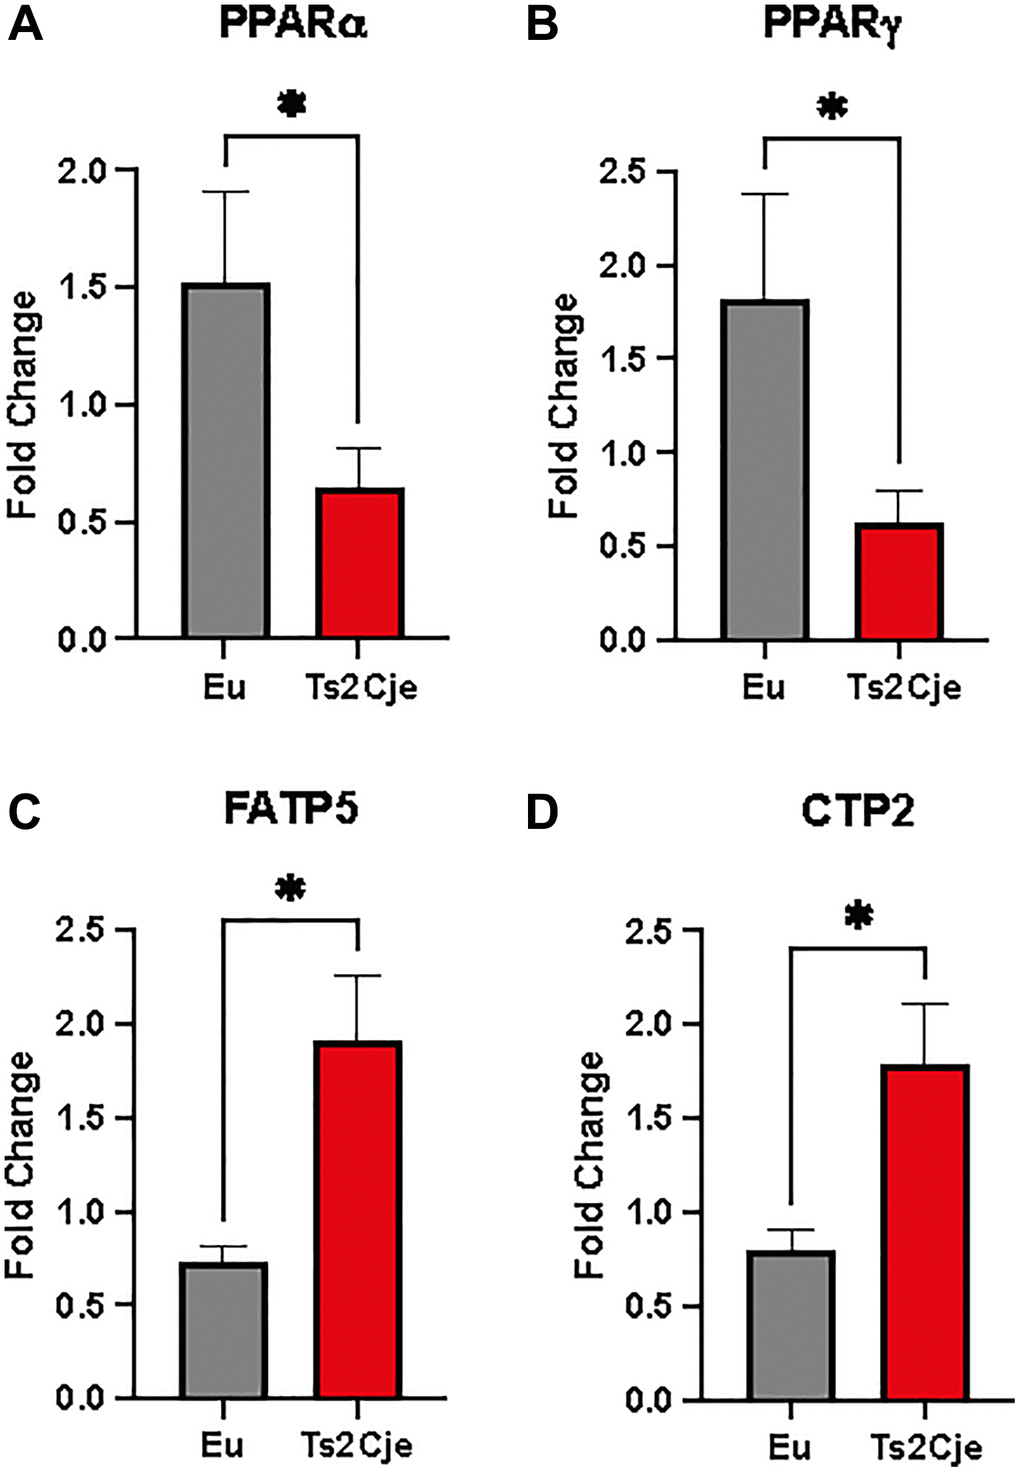 DS mice have a marked increase in lipid metabolism. PPARα, PPARγ, FATP5, and CTP2 are differently regulated in Ts2Cje livers. Representative histogram of the real-time PCR against PPARa (A), PPARg (B), FATP5 (C), and CTP2 (D) on the liver extract obtained from 12-months old Eu and Ts2Cje mice. GAPDH was used as housekeeping gene. Histograms are representative of four different experiments (*P ≤ 0.05).